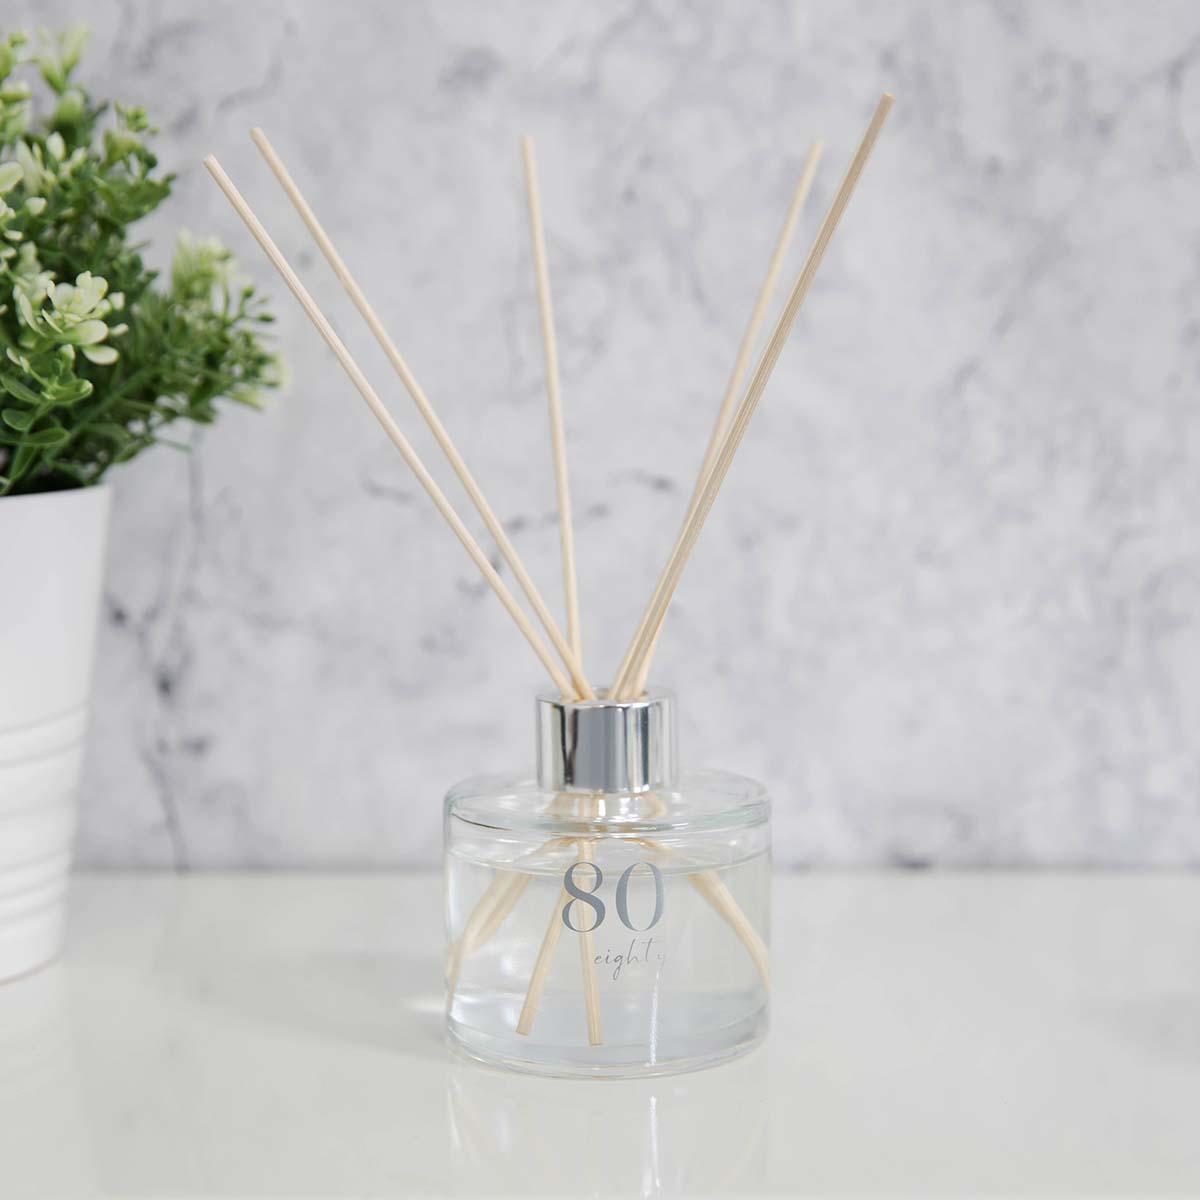 Age 80 Reed Diffuser Displayed In Use